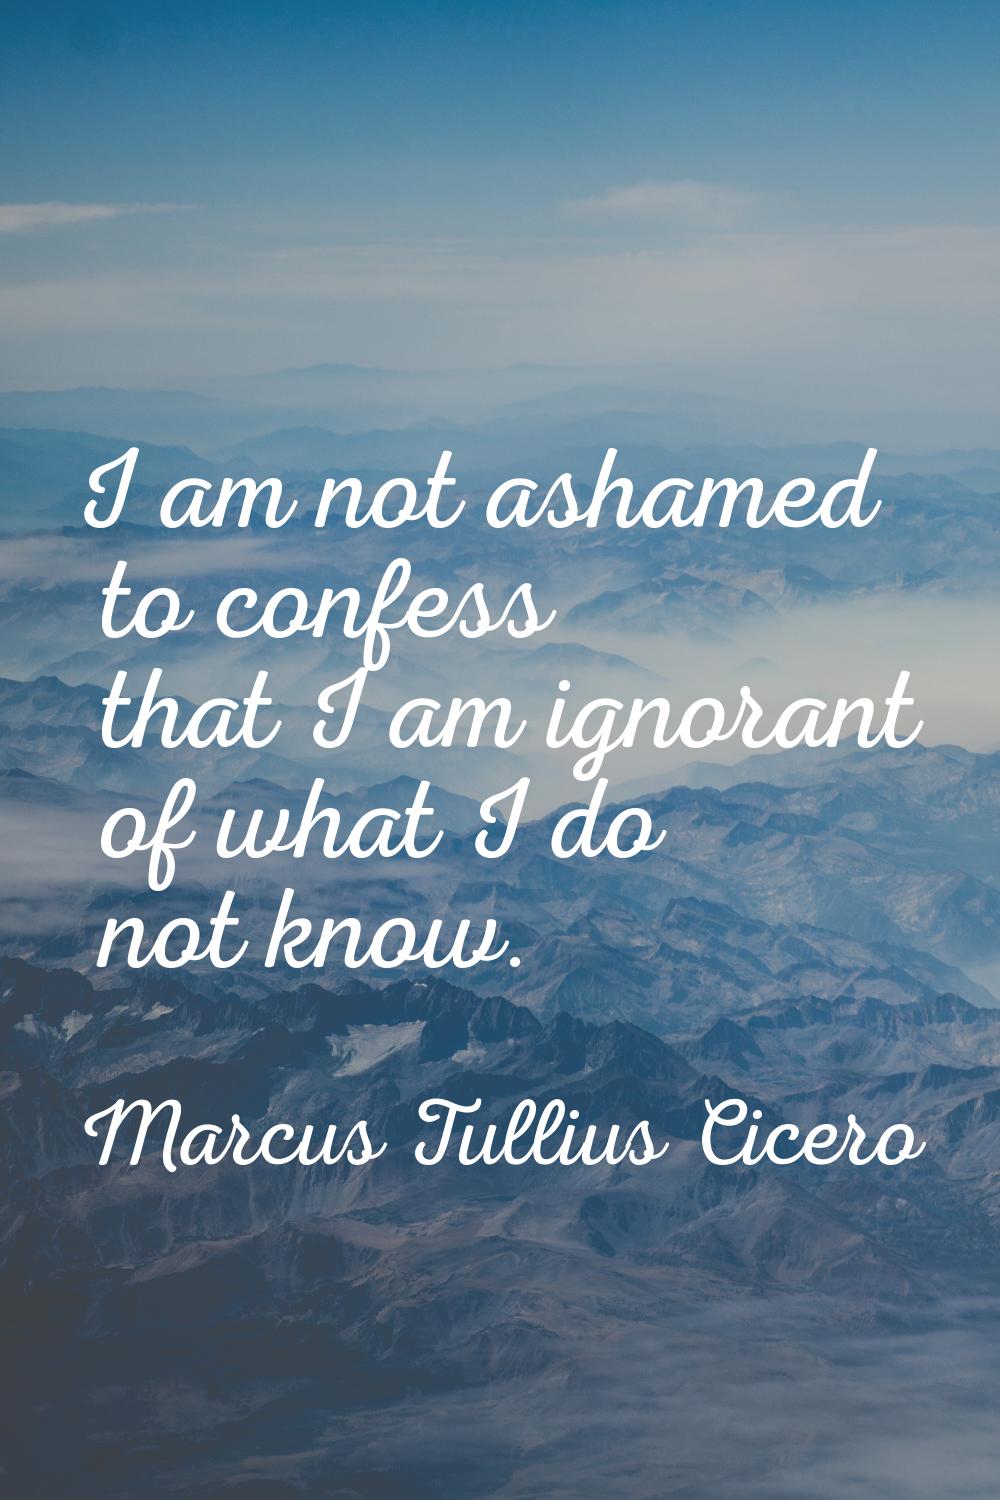 I am not ashamed to confess that I am ignorant of what I do not know.